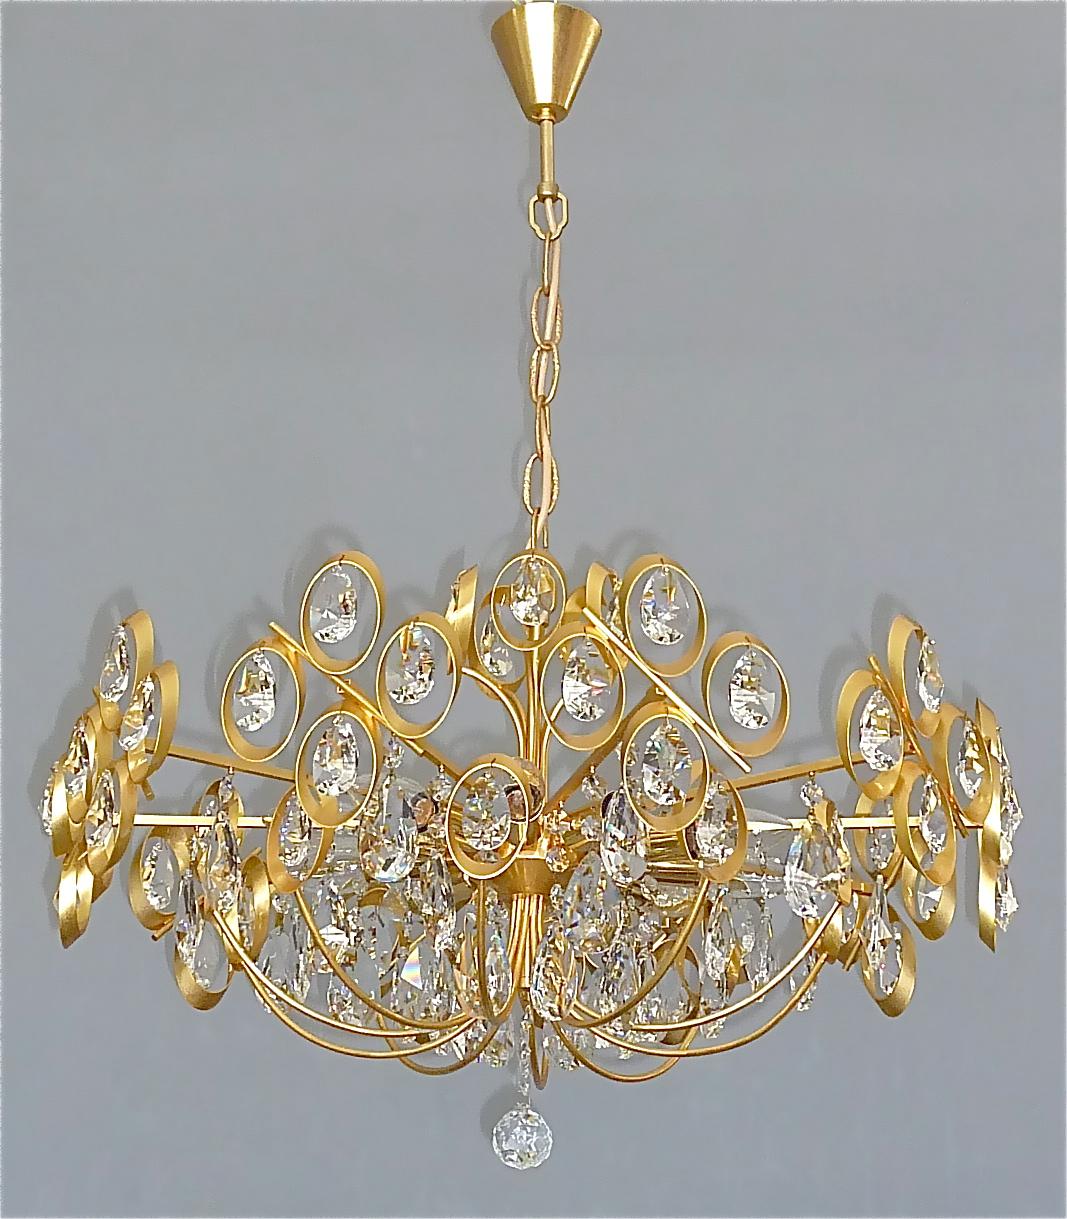 Large rare gilt brass and crystal glass sputnik chandelier made by Palwa, Germany, circa 1960-1970. The chain-hanging length-adjustable chandelier has a gilt brass metal sputnik construction with lots of big tear drop shape high lead hand-cut